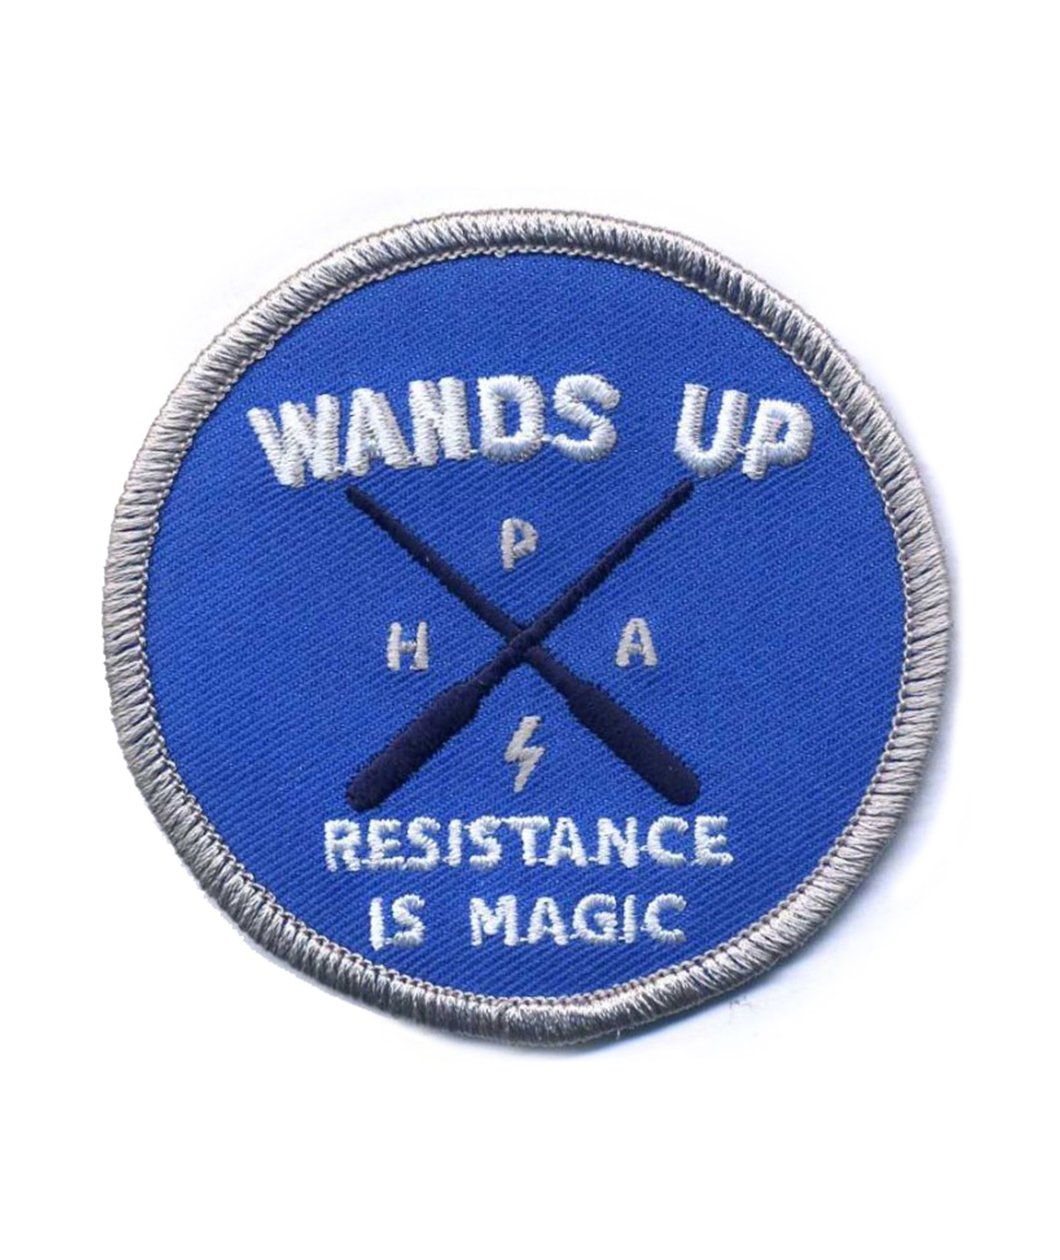 Wands Up, Resistance is Magic patch